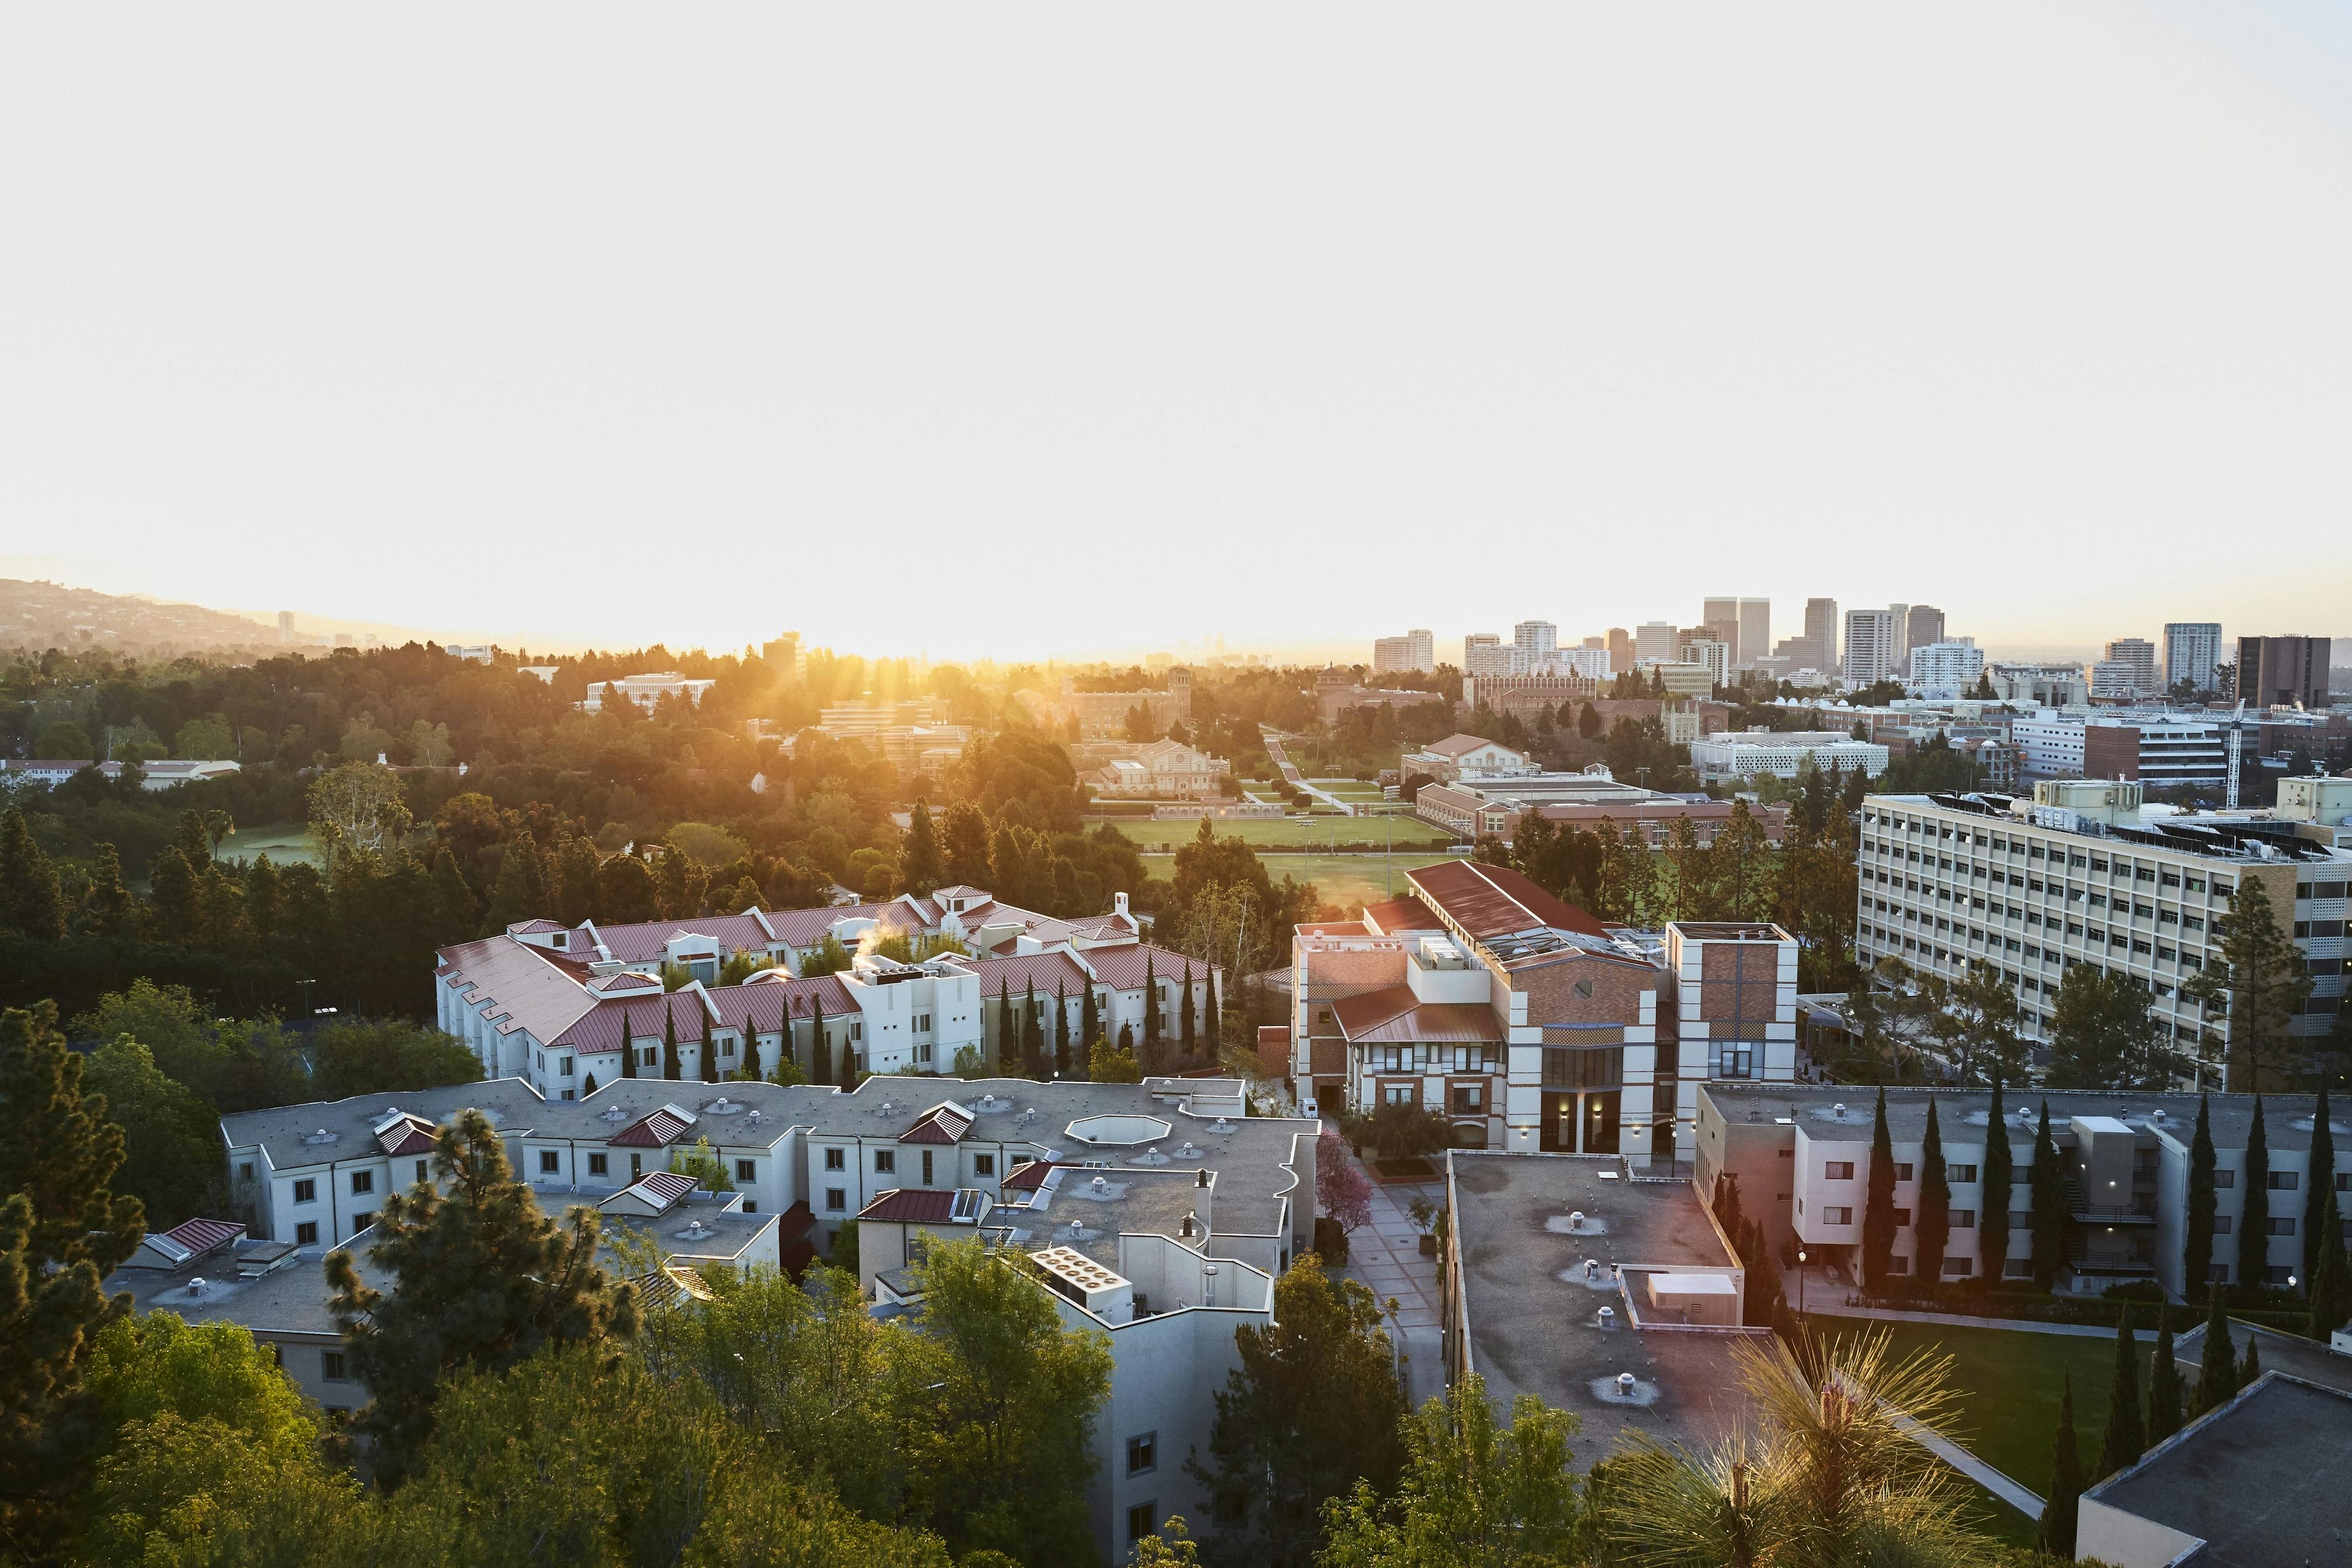 UCLA dorms from a bird's eye view